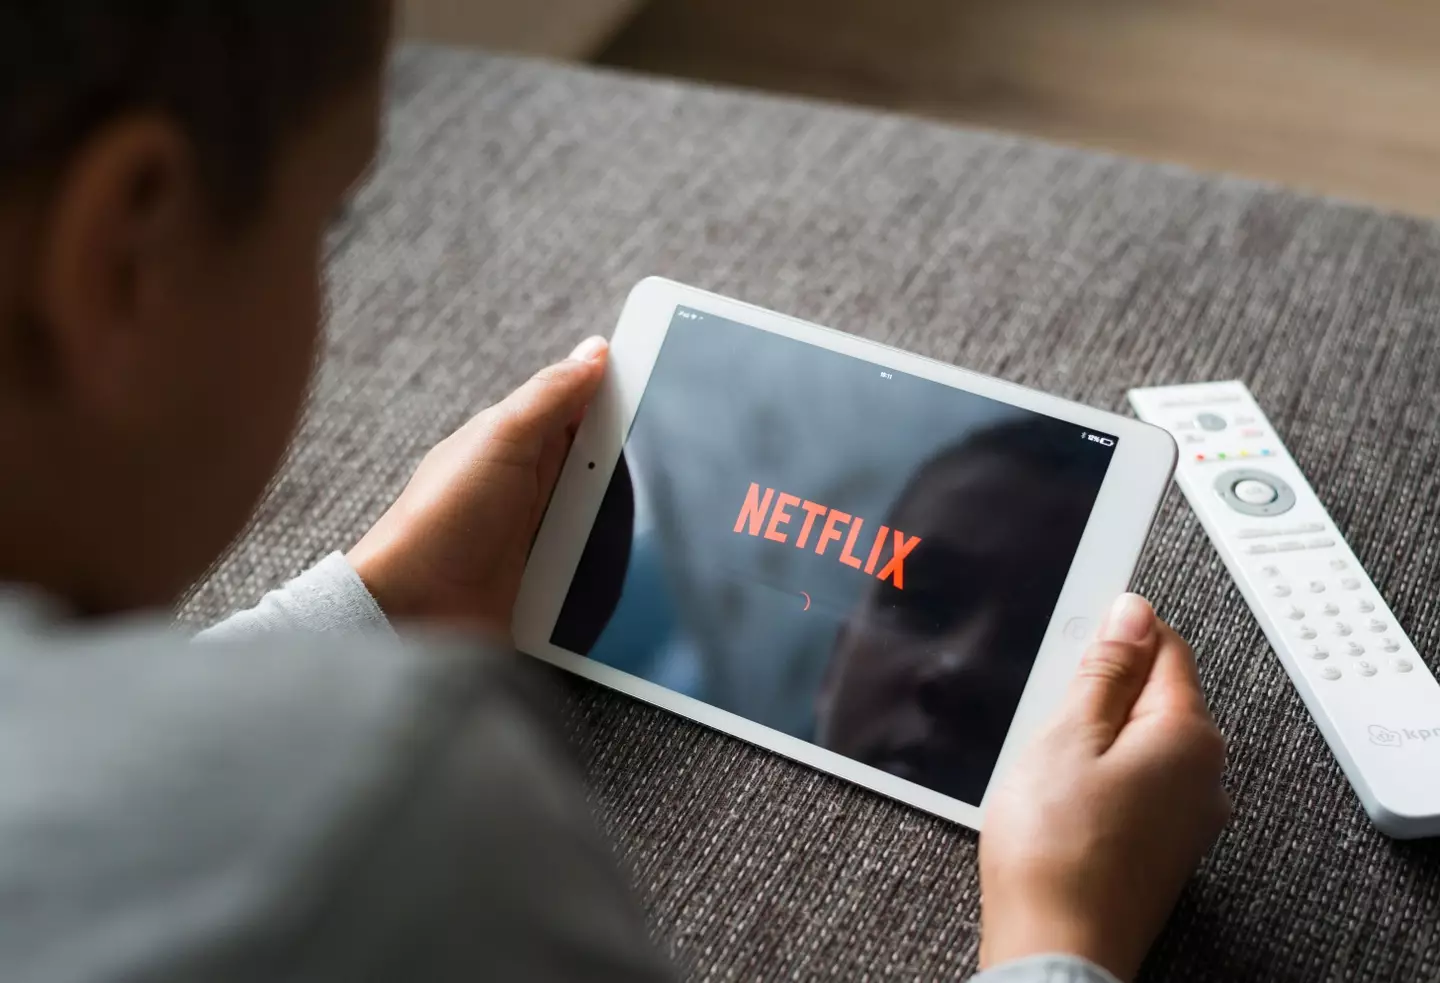 Netflix has a seriously cleaver way hooking viewers.